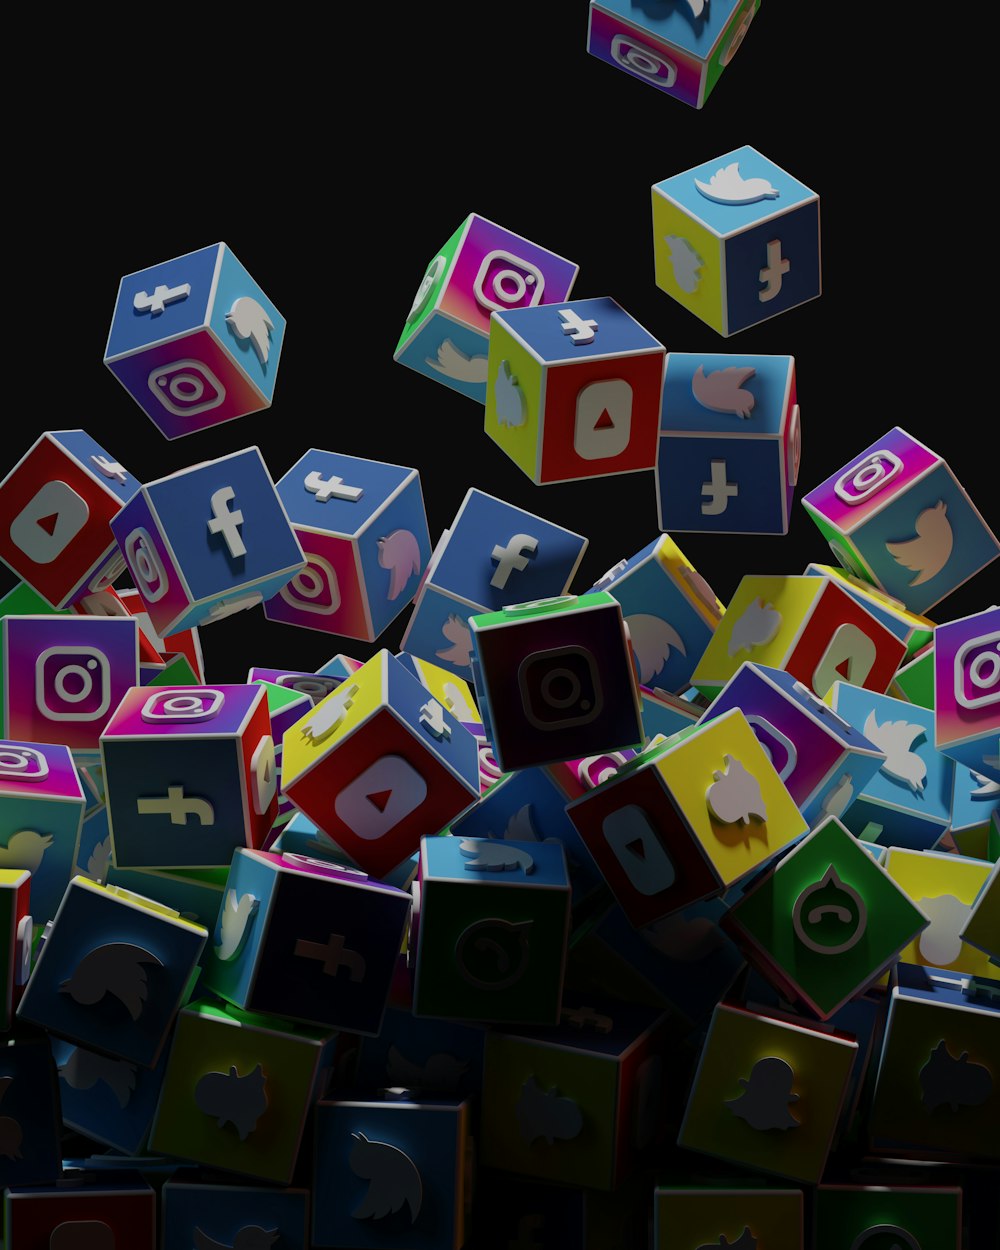 a pile of colorful cubes with social icons flying out of them